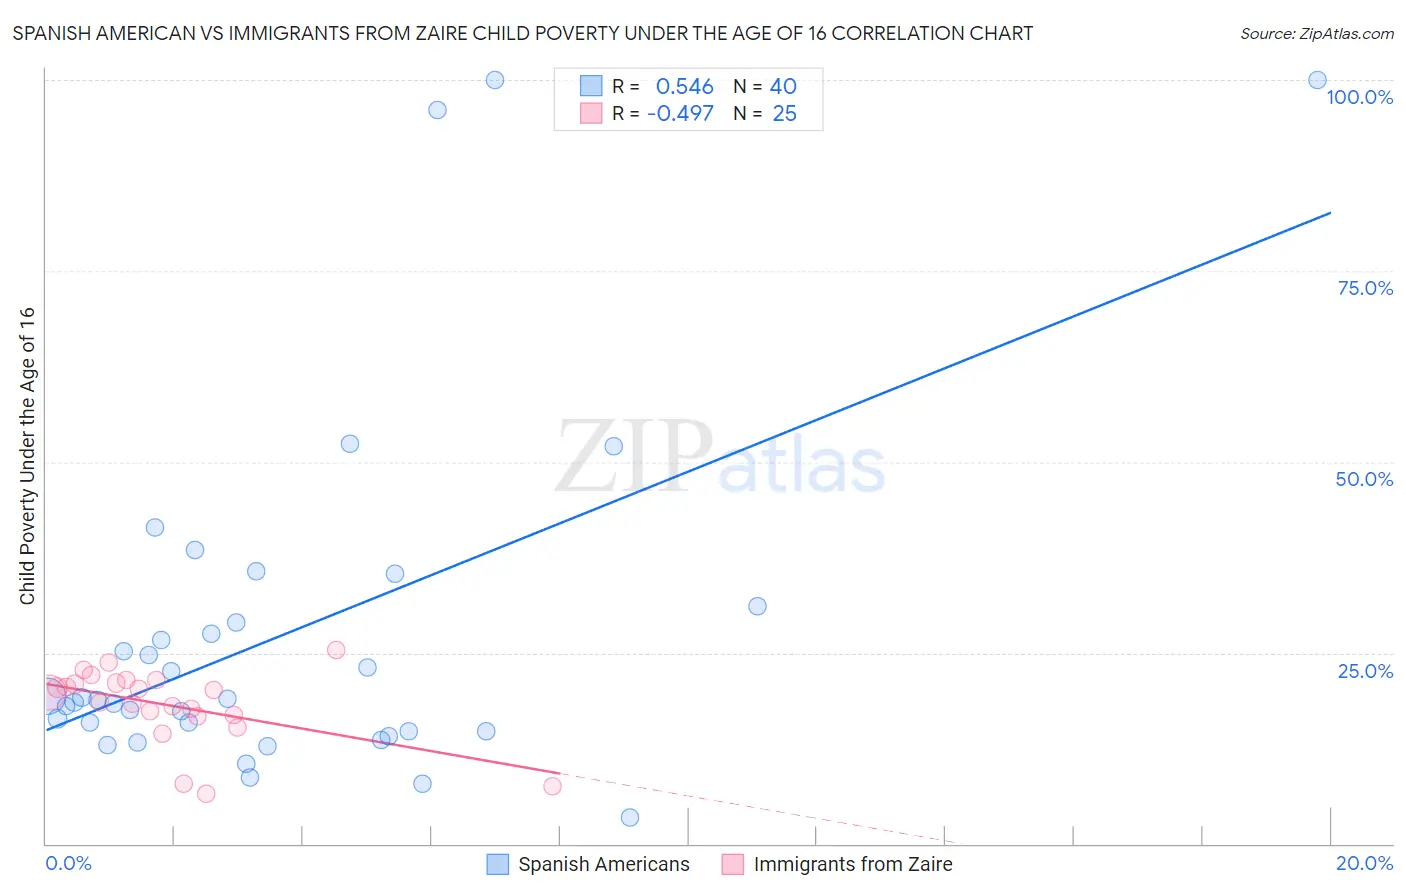 Spanish American vs Immigrants from Zaire Child Poverty Under the Age of 16